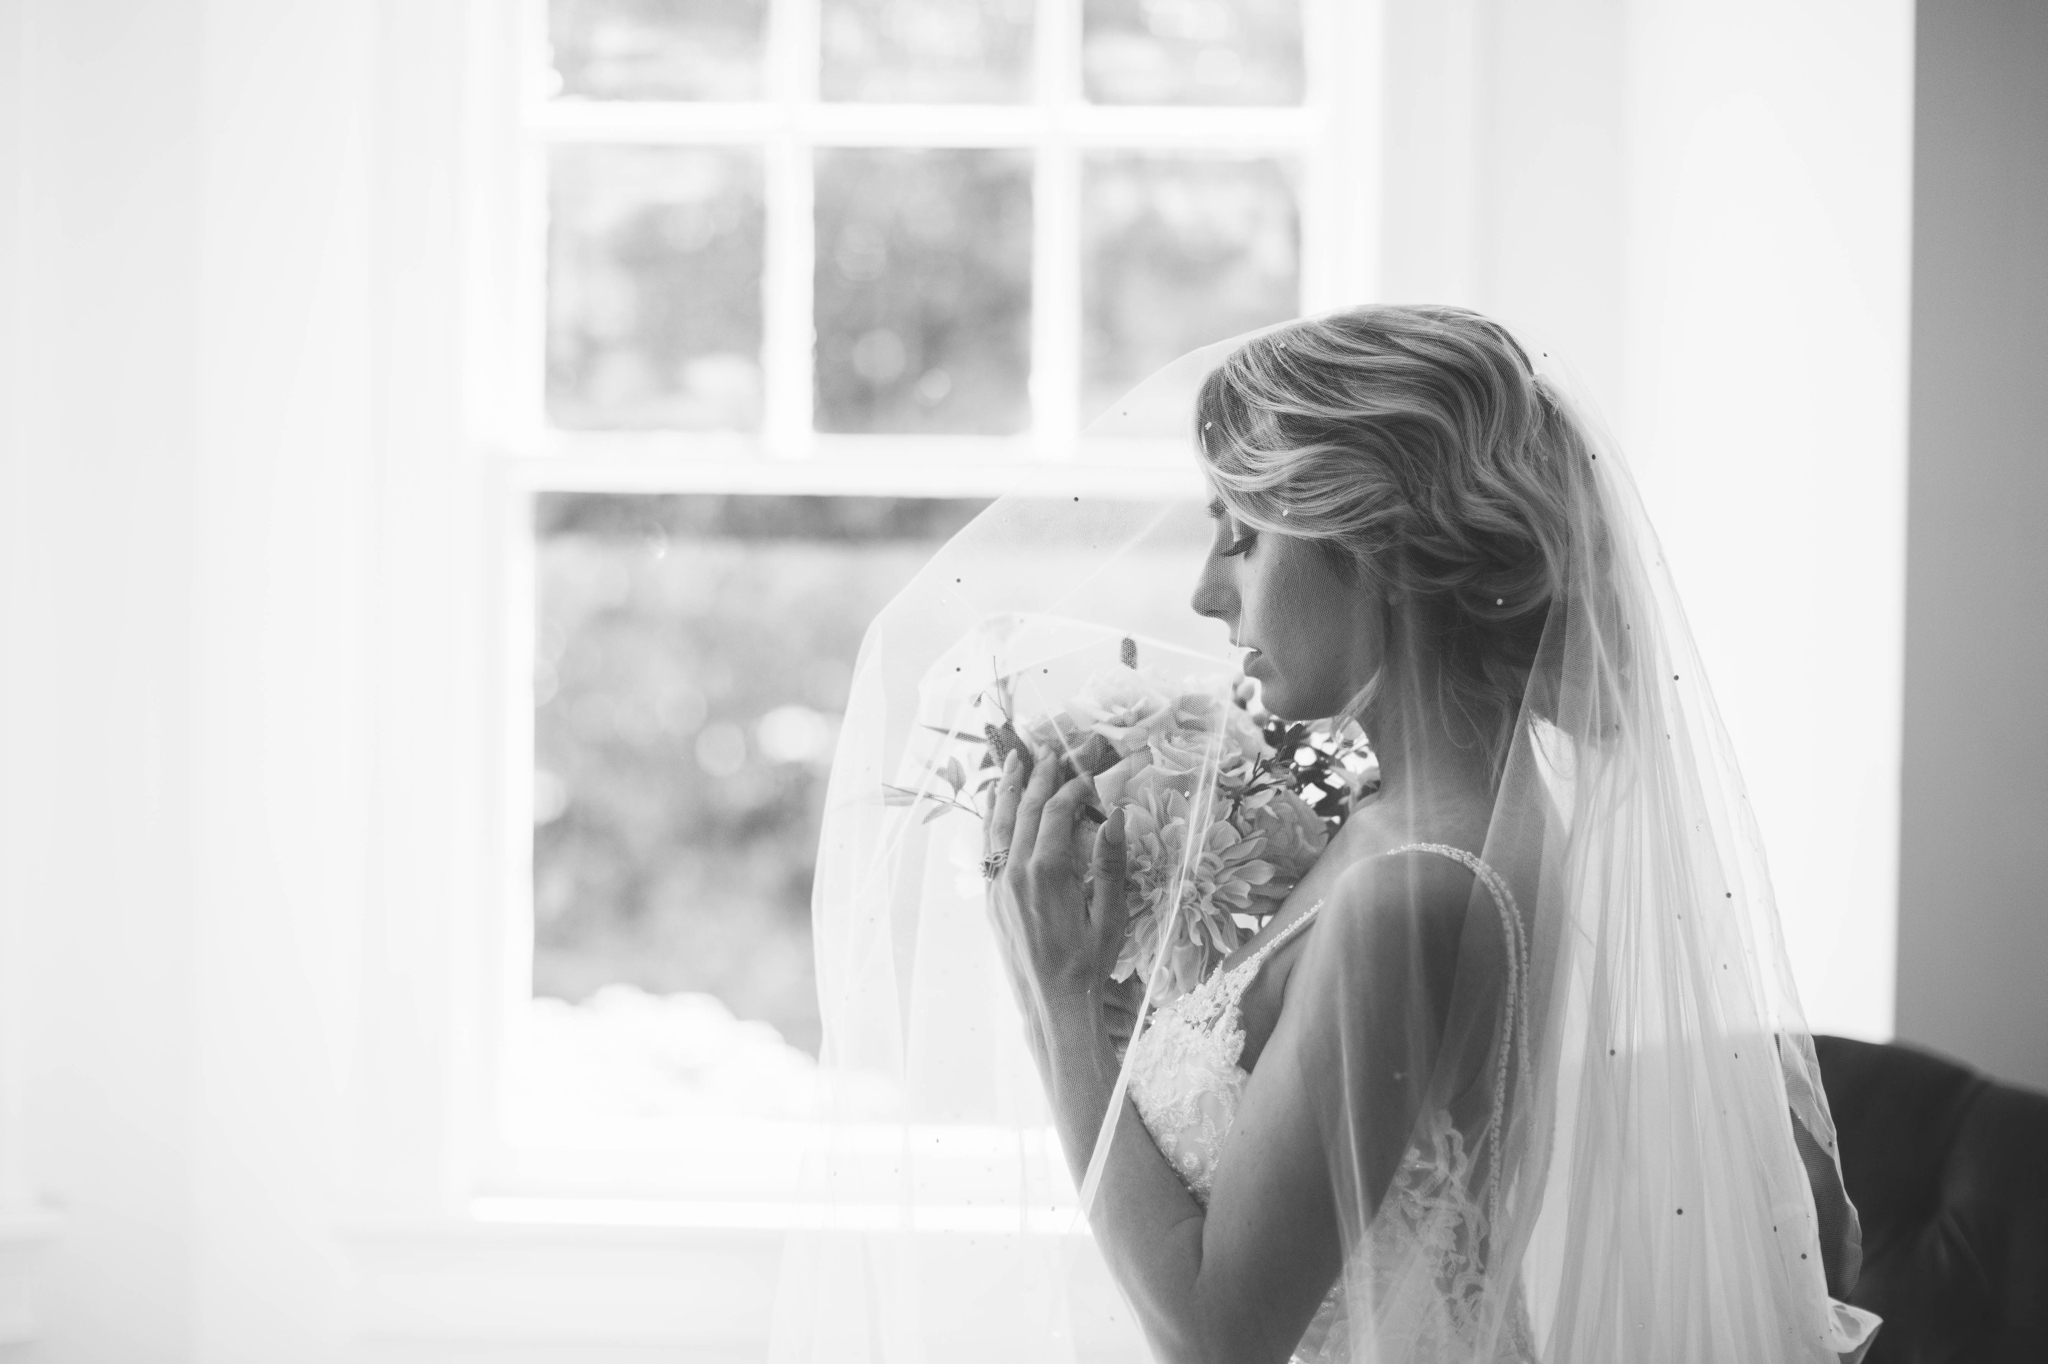  black and white Indoor Natural Light Bridal Portraits by a window with a white backdrop - classic bride with soft drop veil over her face -  wedding gown by Stella York - Honolulu, Oahu, Hawaii Wedding Photographer 